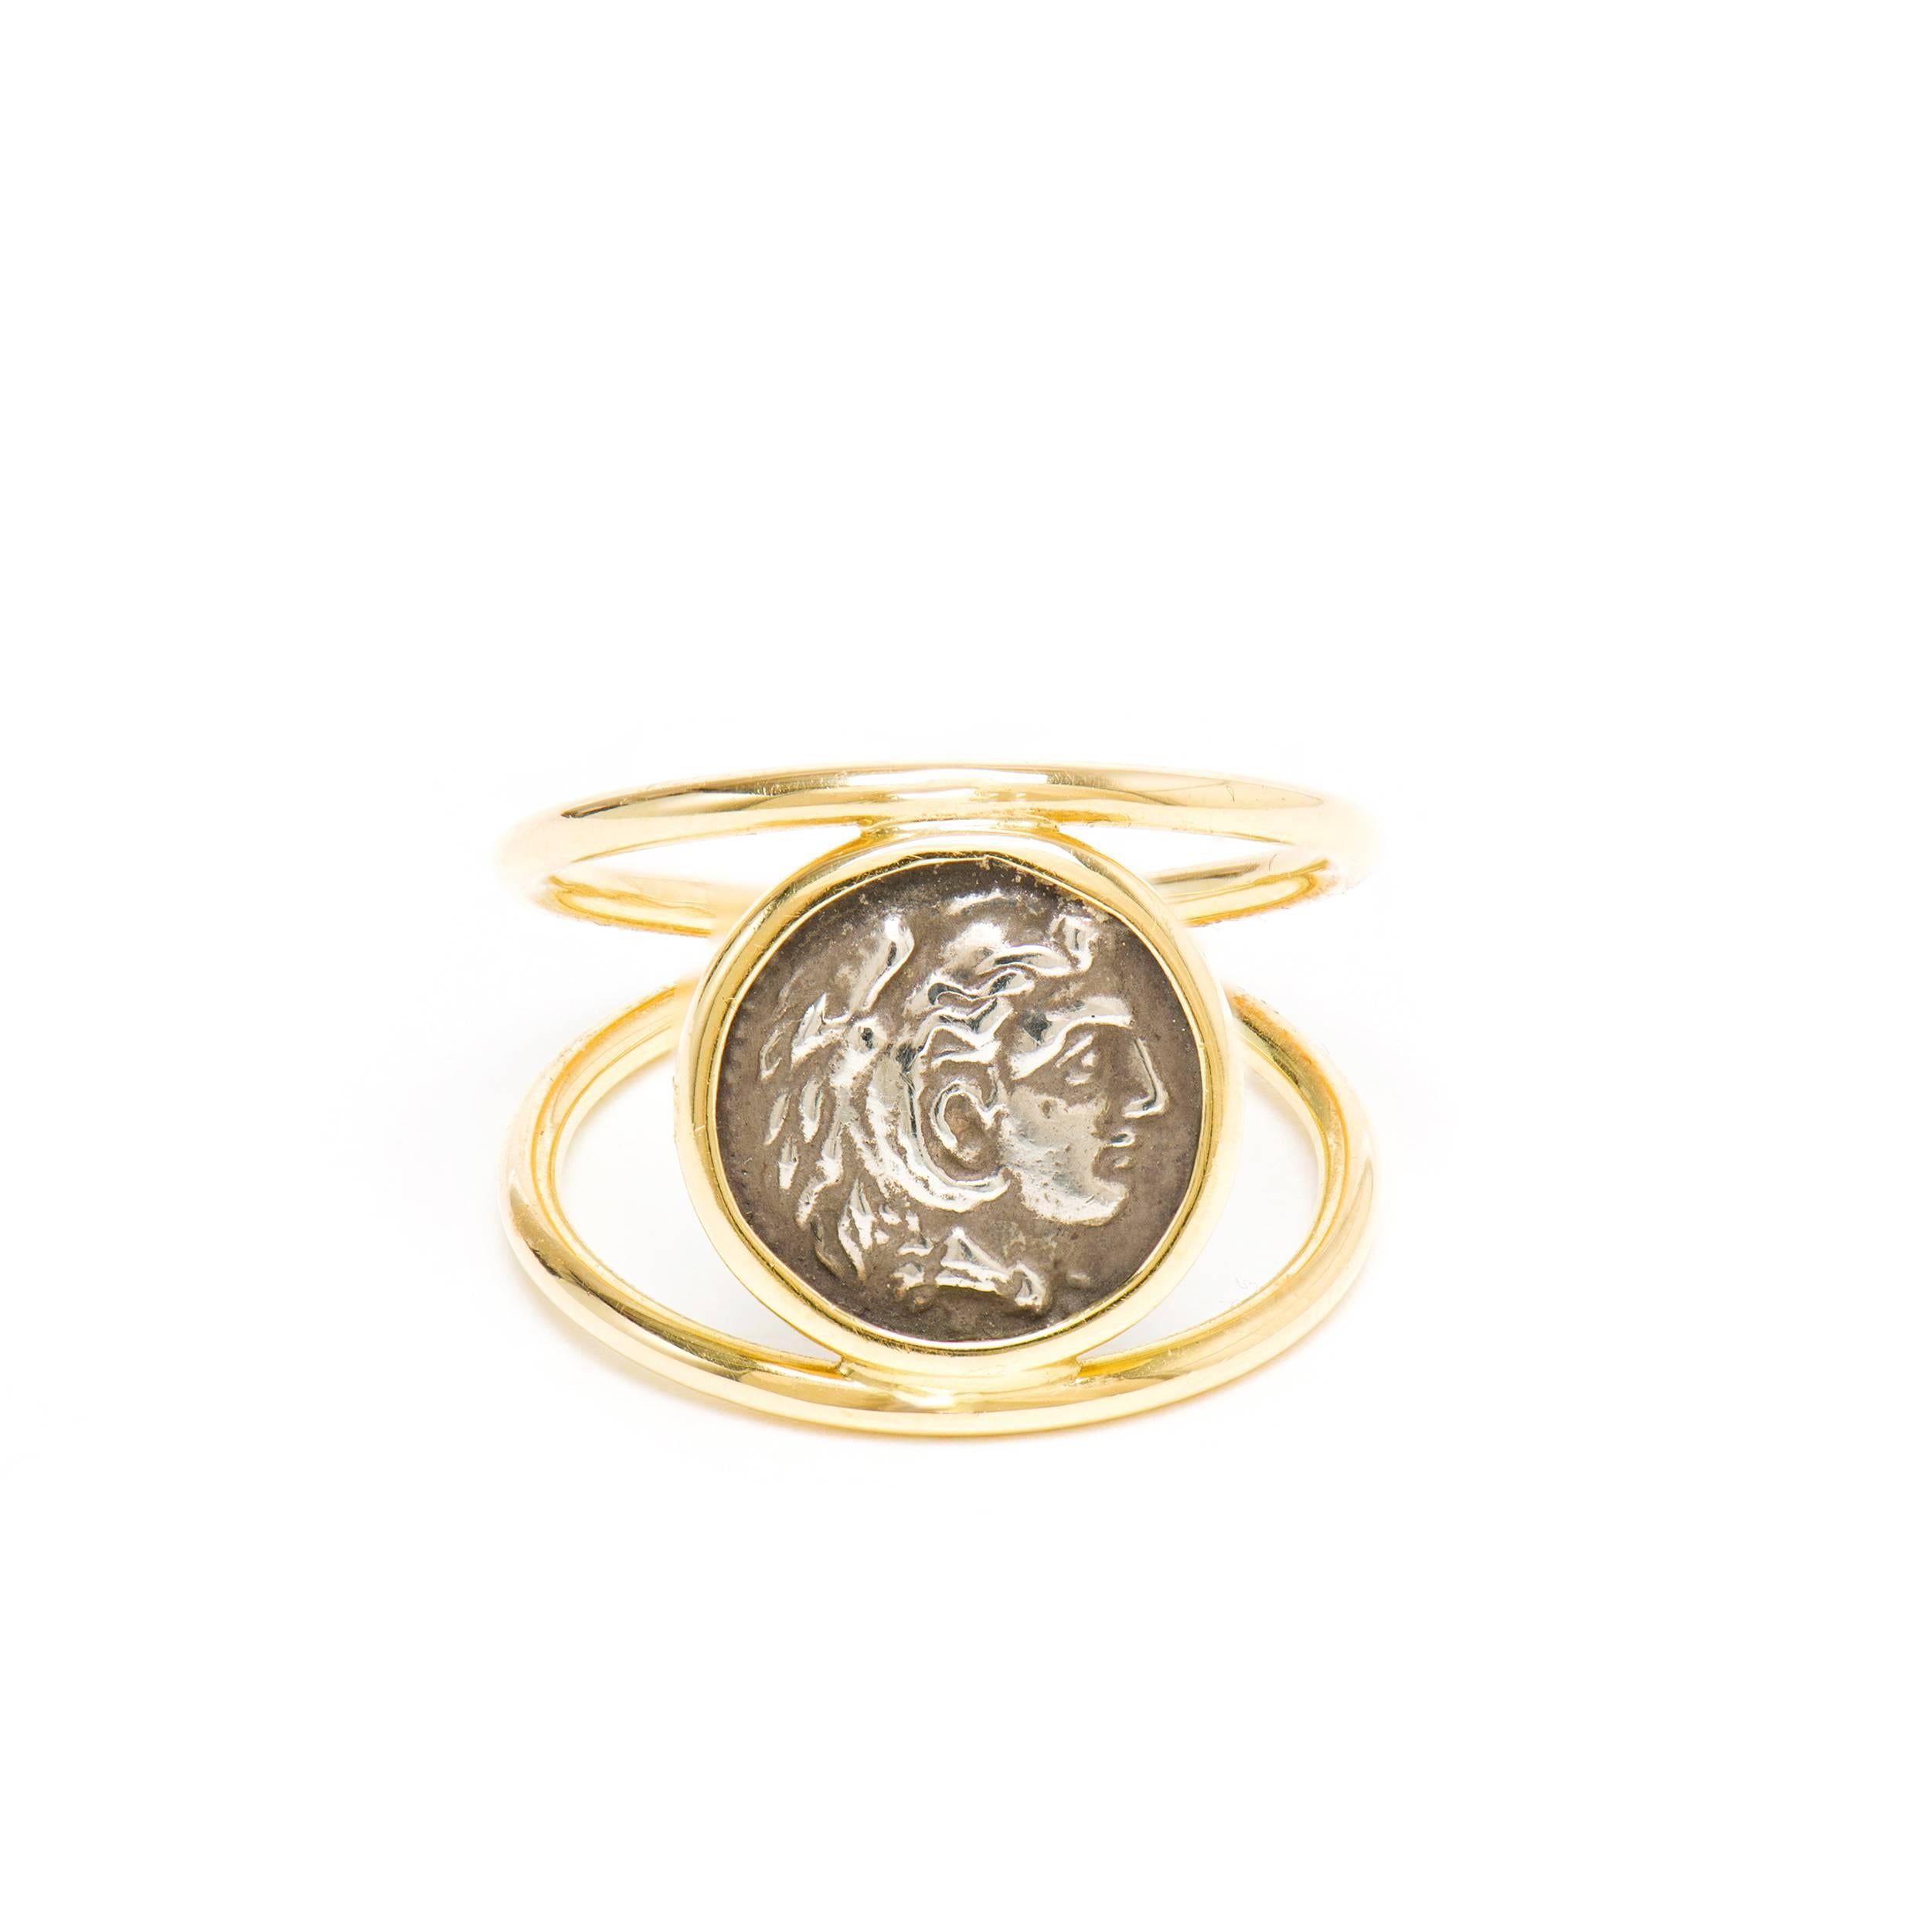 This DUBINI coin ring from the 'Empires' collection features an Alexander the Great silver coin set in 18K yellow gold.

HISTORY

Herakles was the greatest hero of the Greeks. Born of the Greek god Zeus and made mortal, he attained divine status by